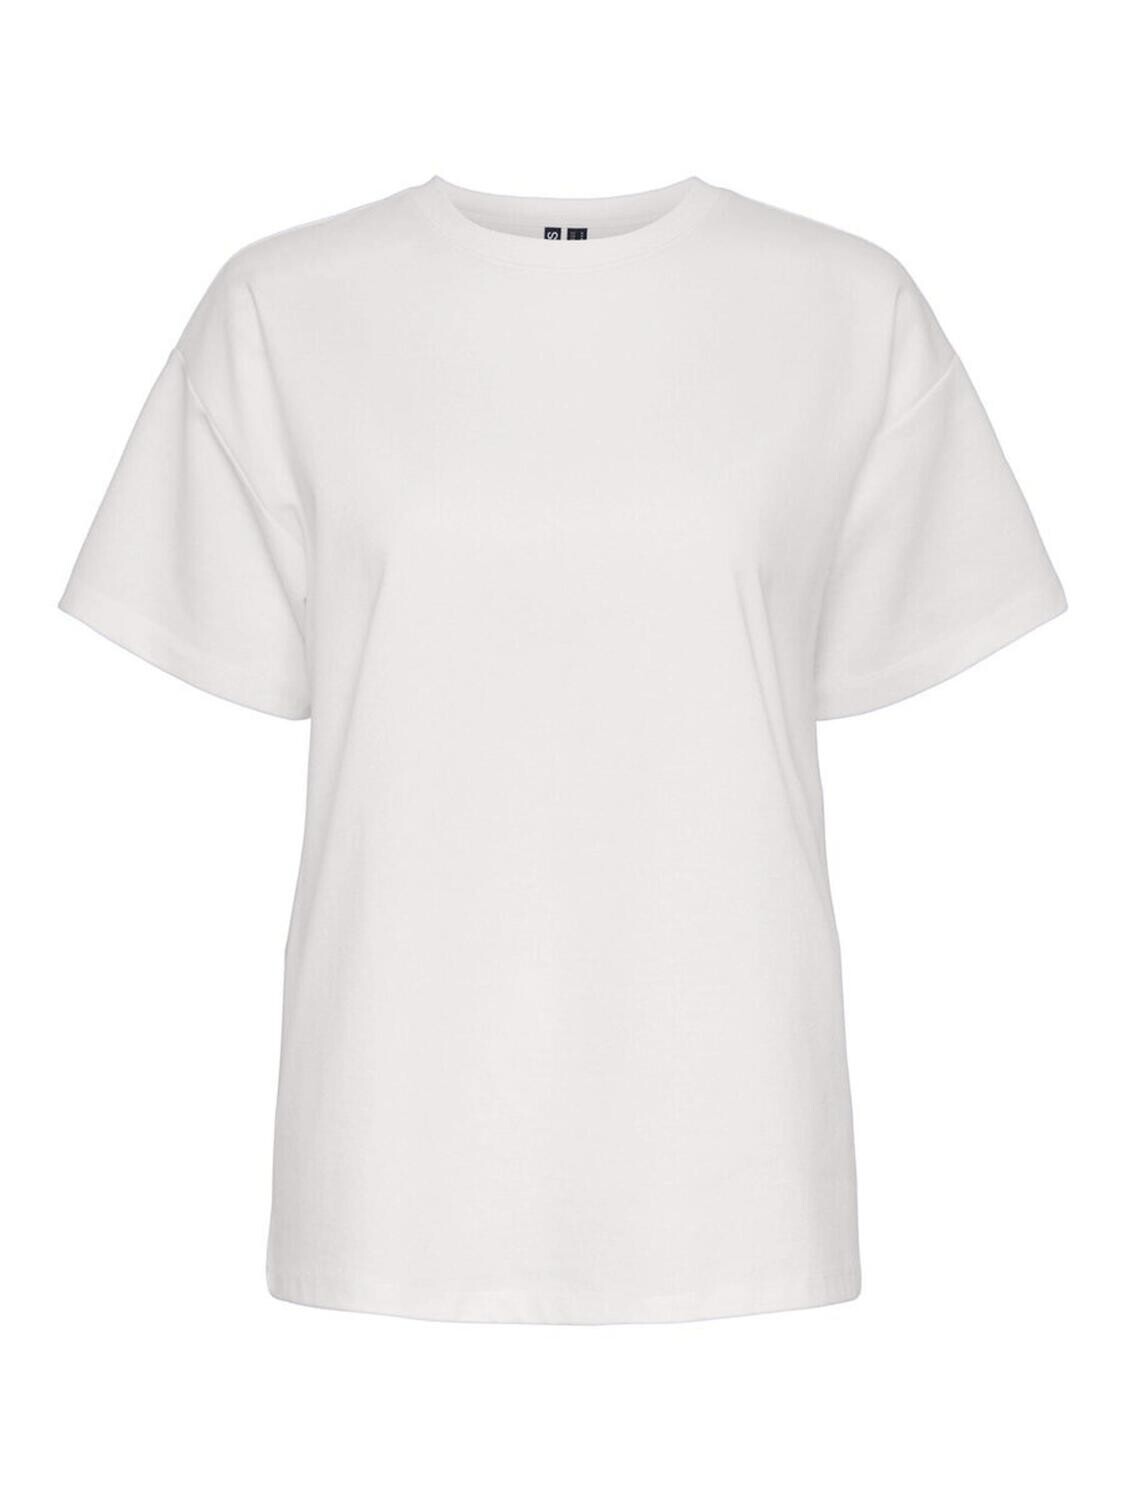 Pieces PCSKYLAR SS OVERSIZED TEE NOOS Bright White 17146654